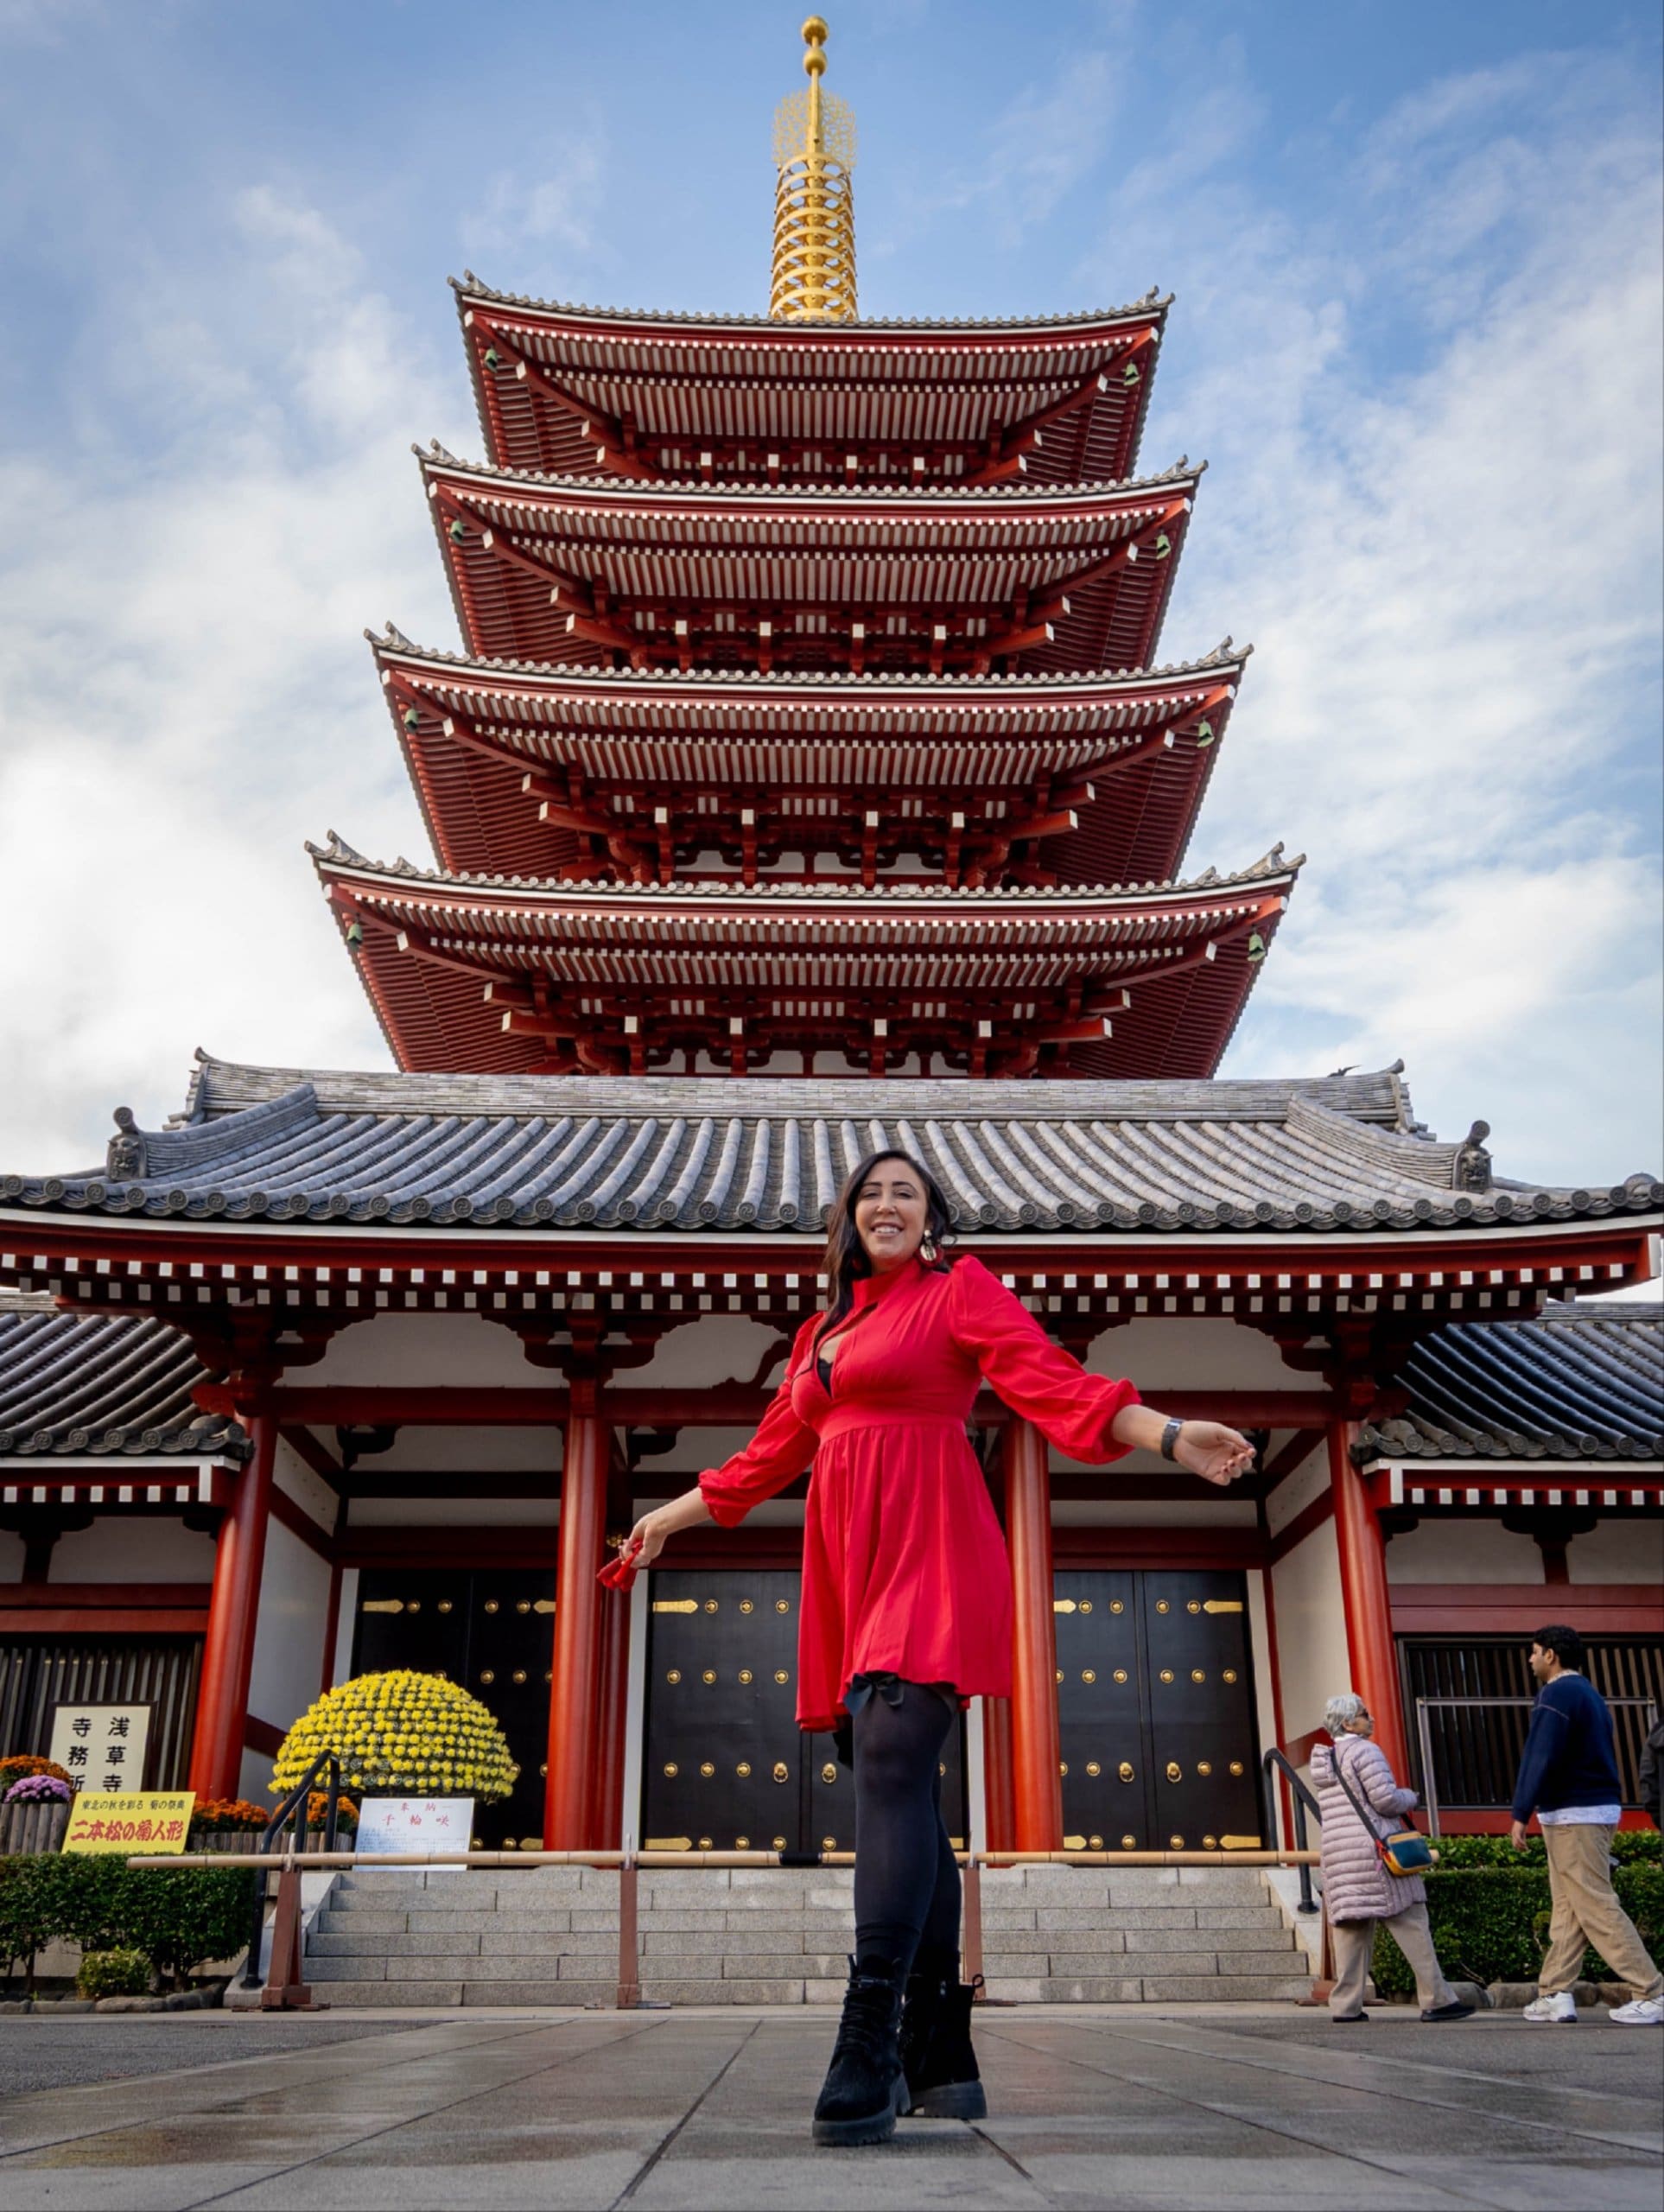 how to capture amazing photos in japan